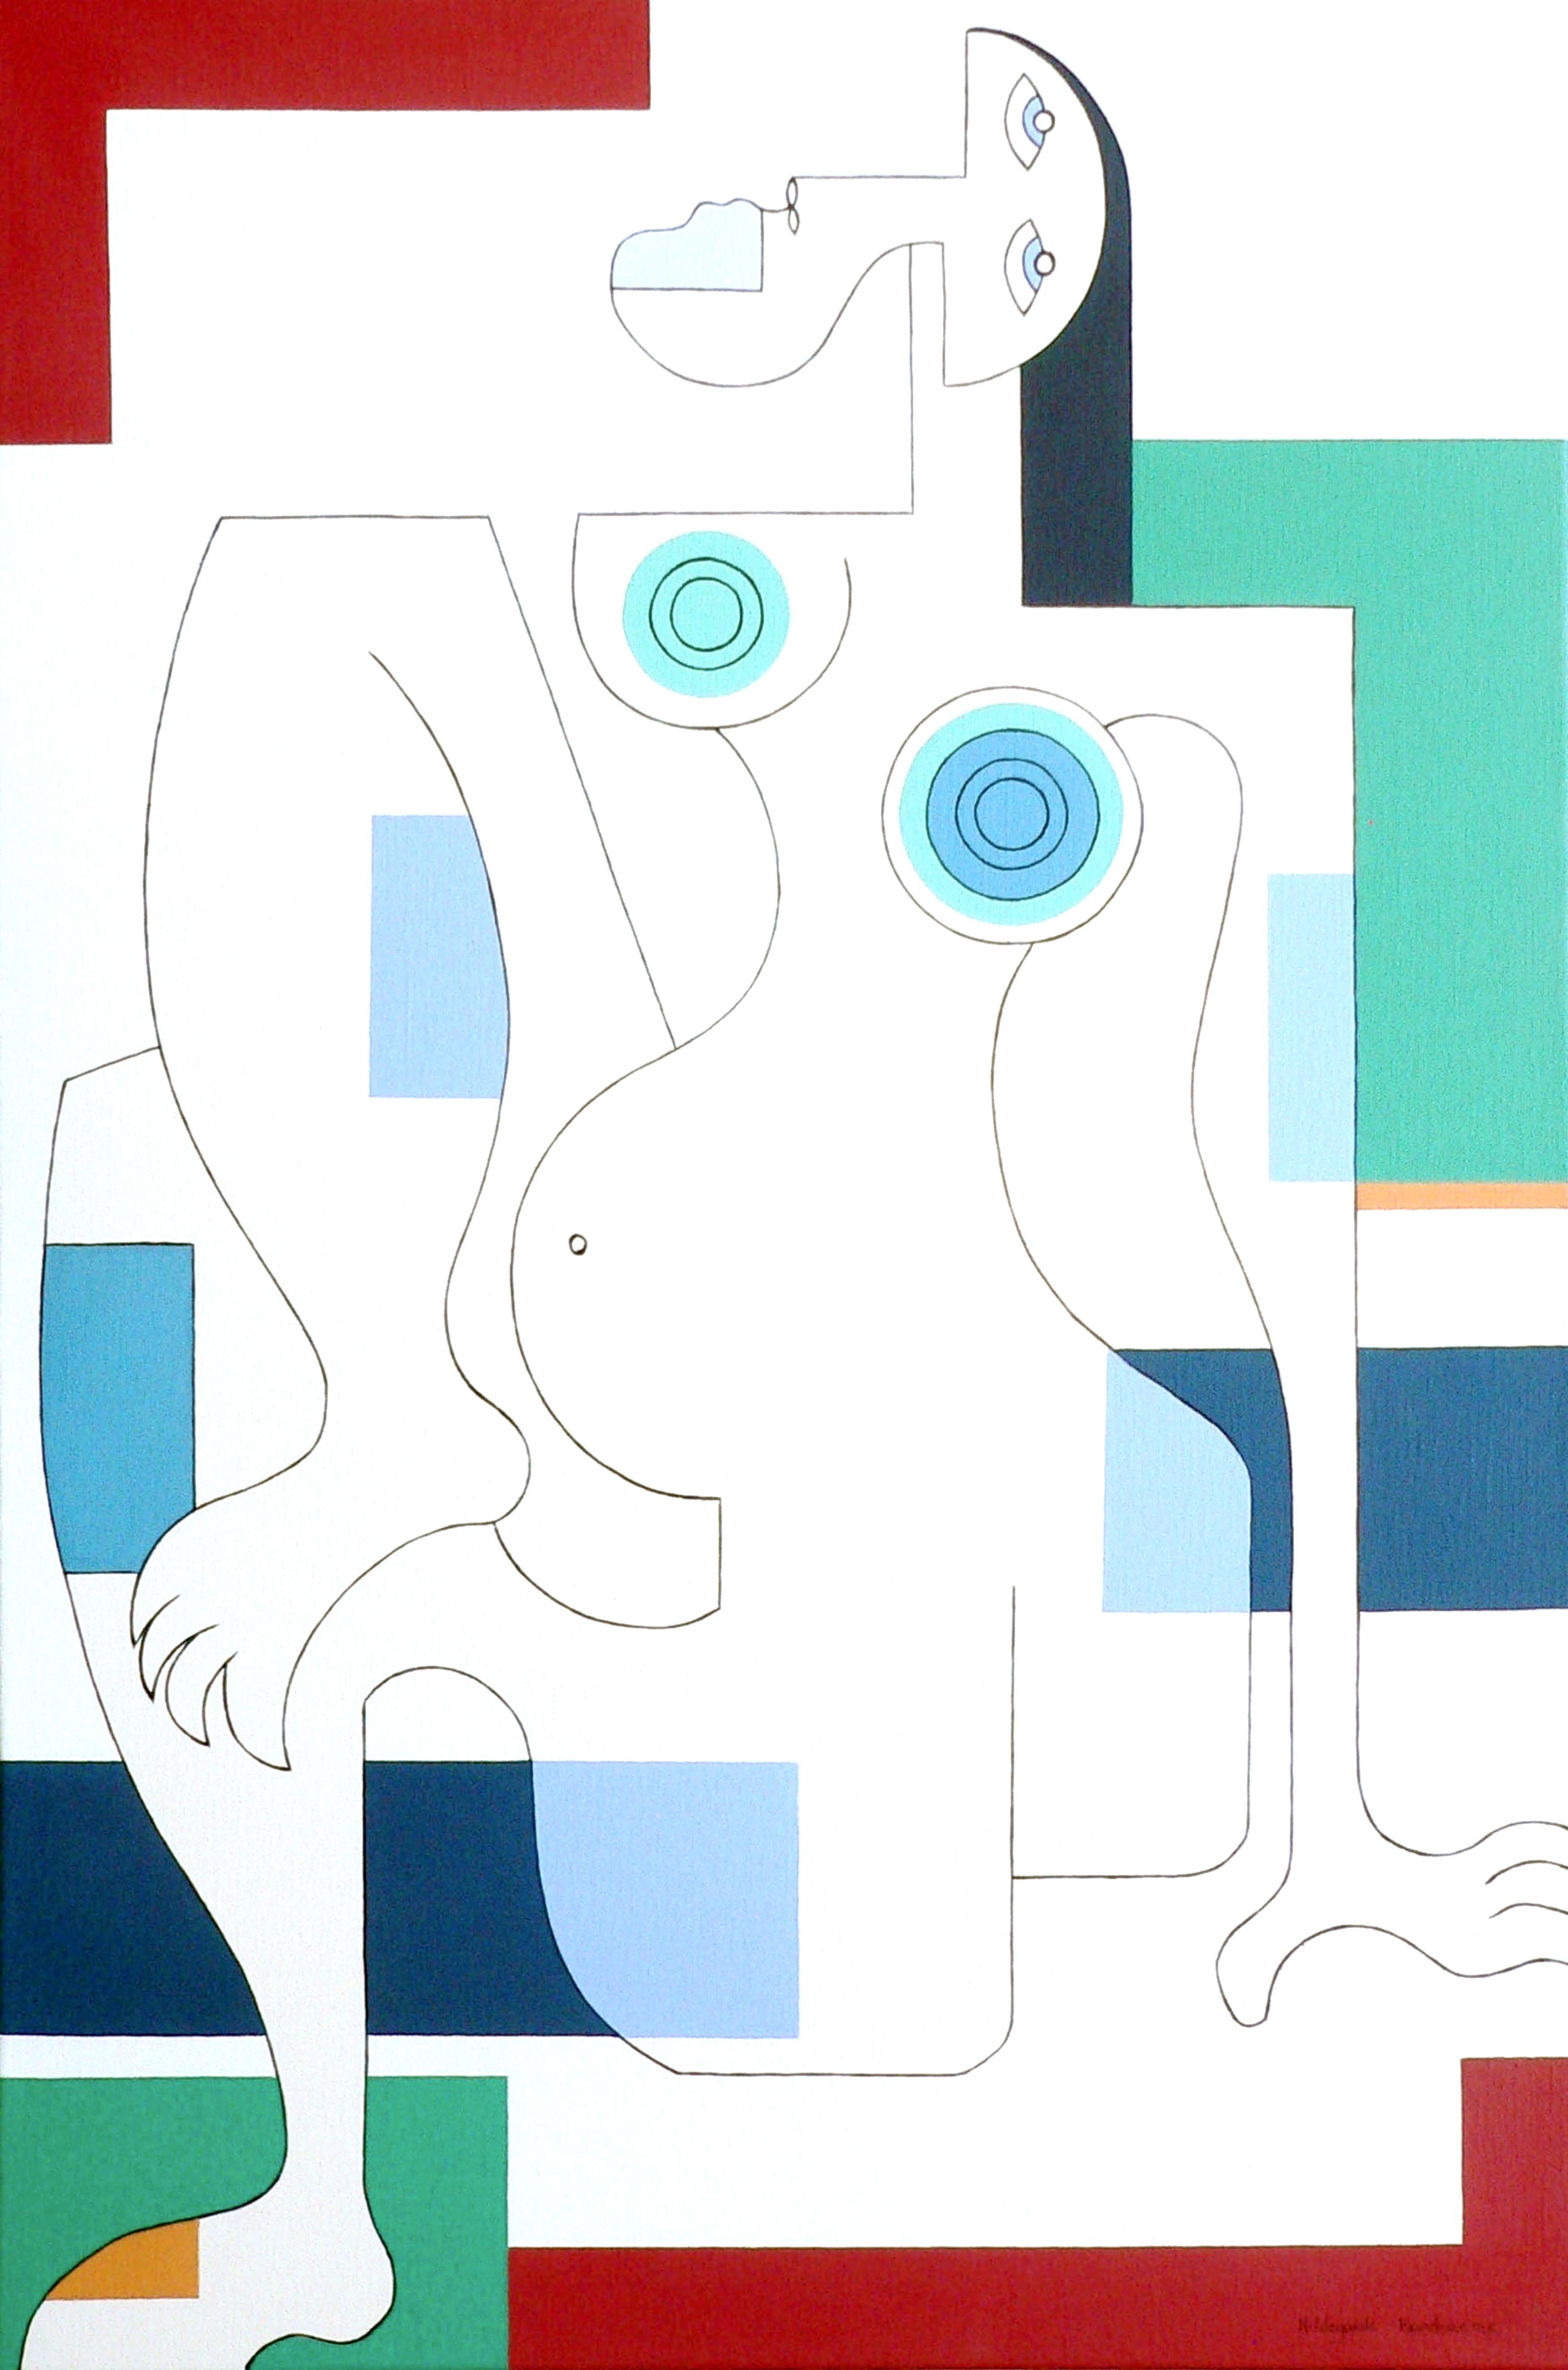 Hildegarde Handsaeme Abstract Painting - Women in Spring, Modern Abstract Geometric Painting Portrait Green Red Pattern